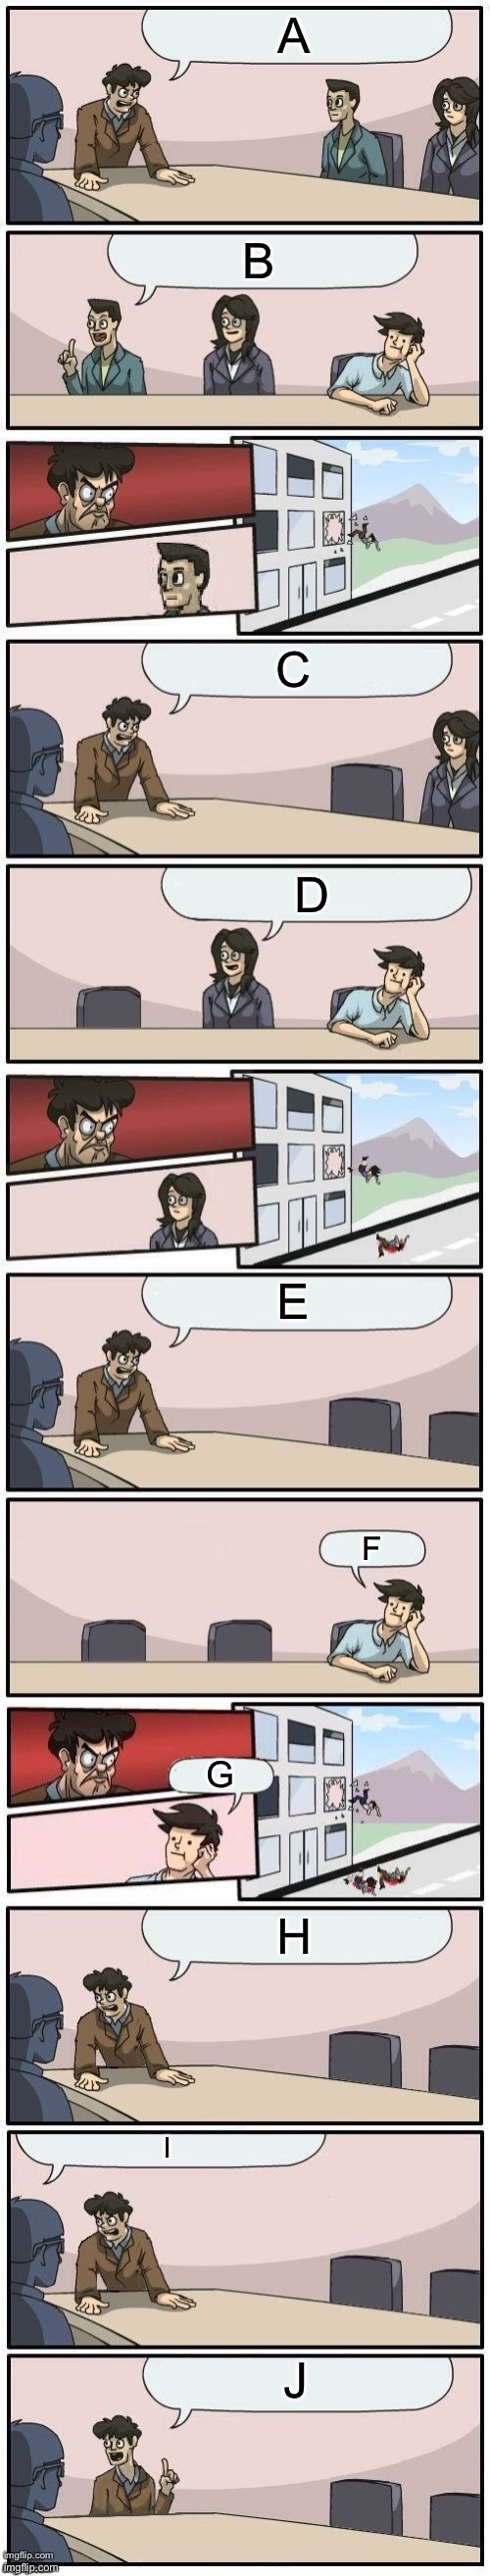 K | A; B; C; D; E; F; G; H; I; J | image tagged in extended boardroom meeting suggestion | made w/ Imgflip meme maker